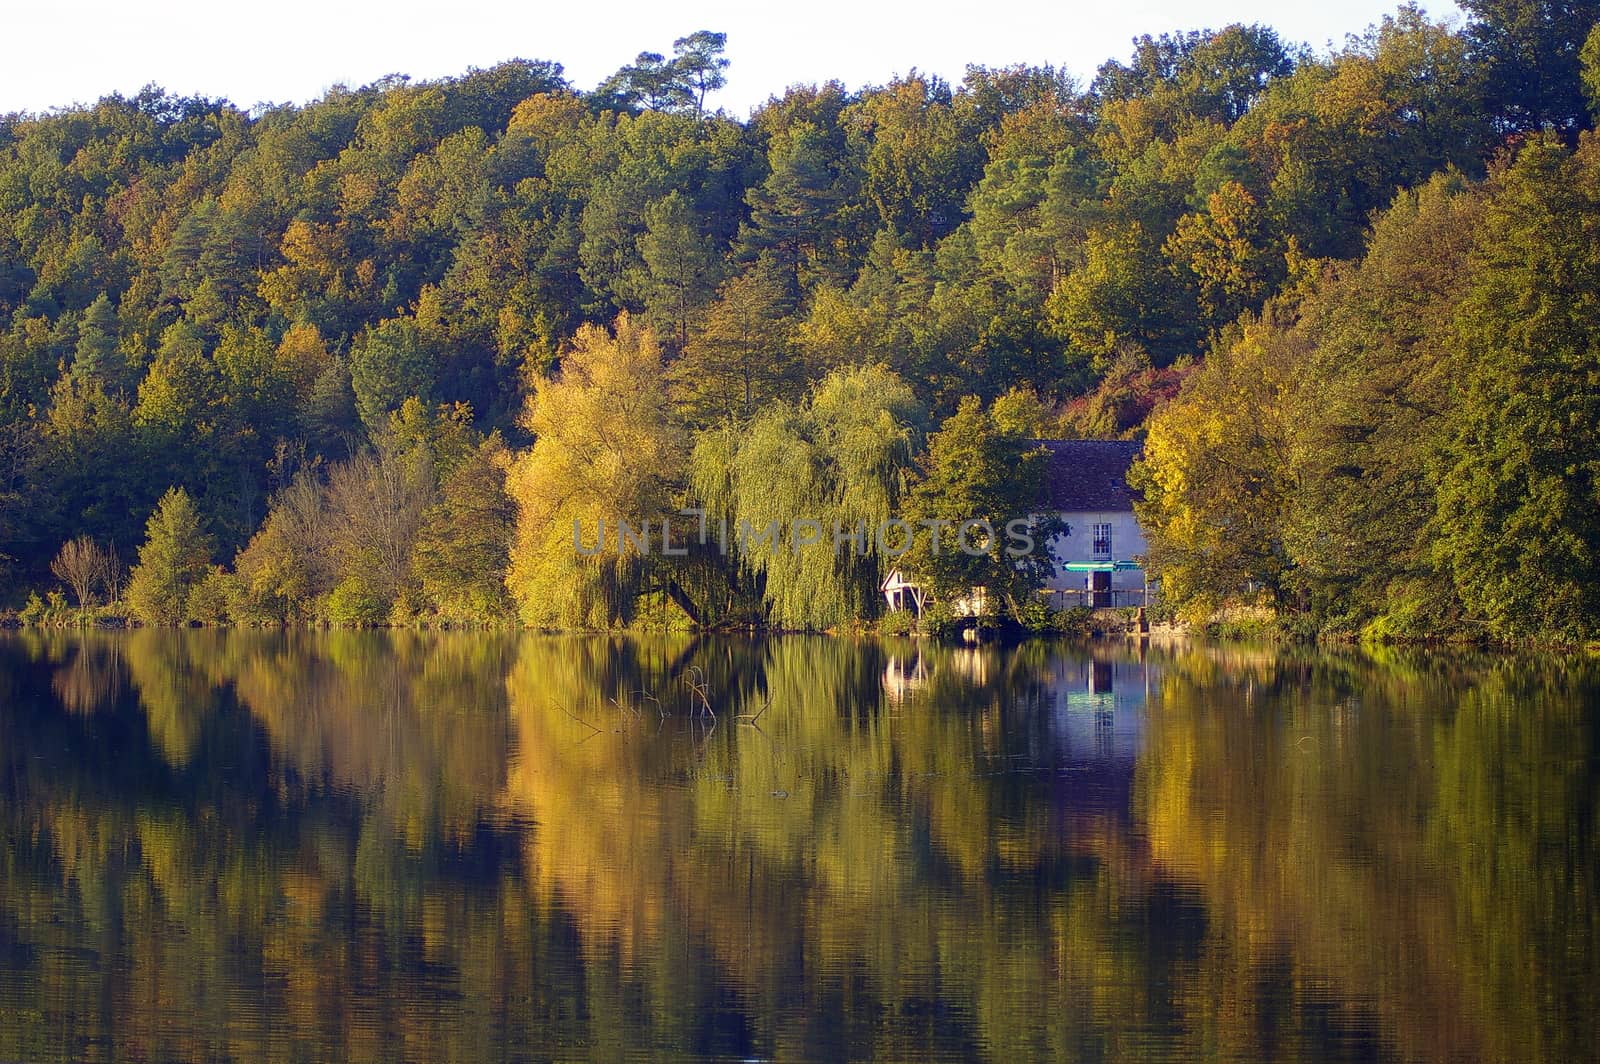 Restaurant on the Indrois river in France, with reflection of the trees in the water